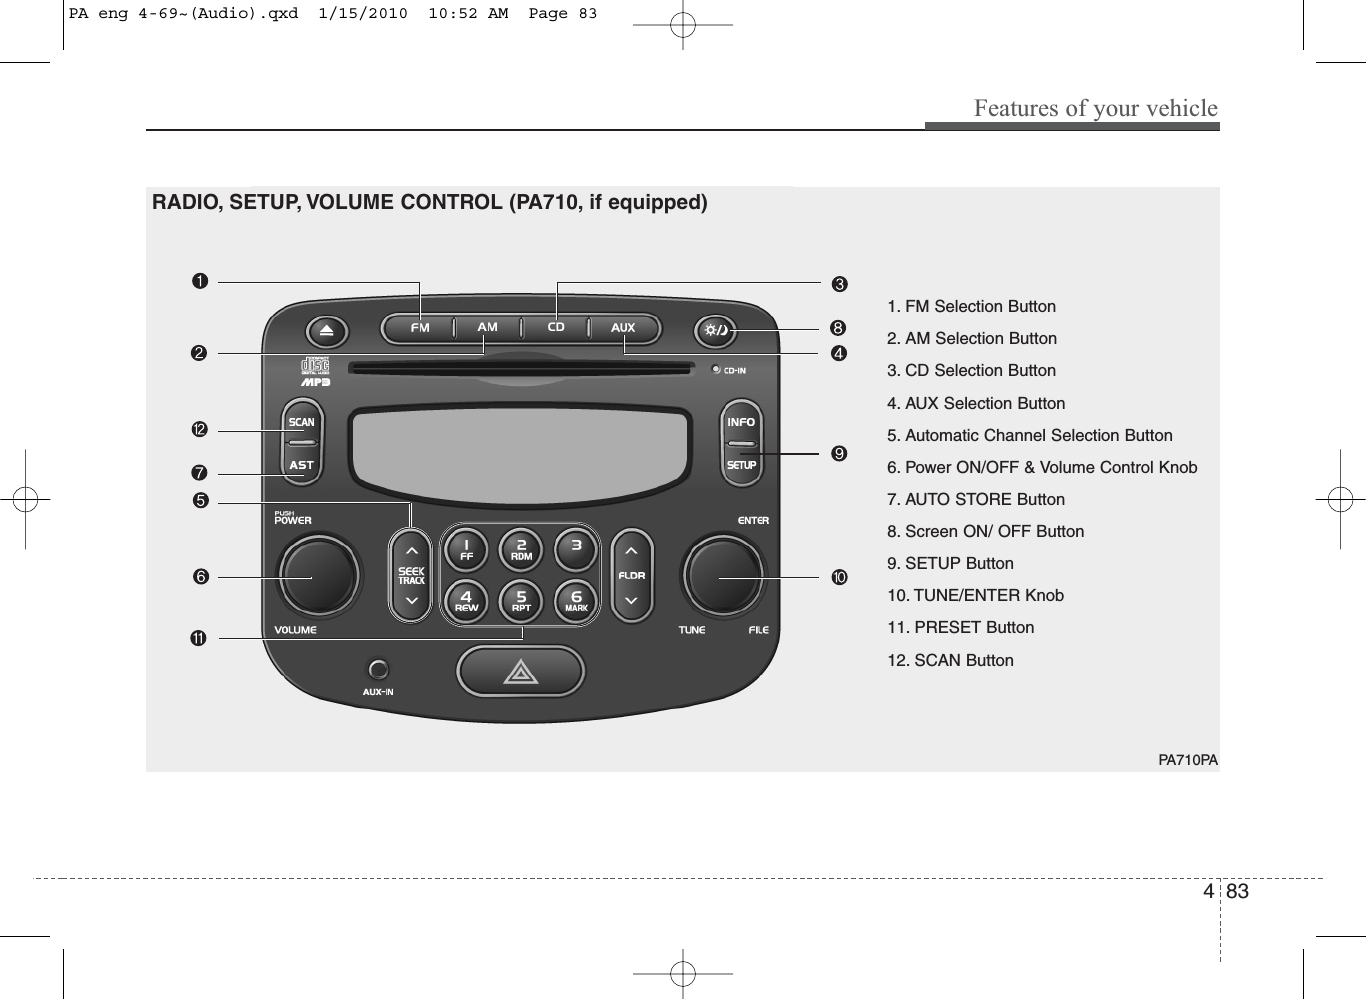 483Features of your vehiclePA710PA1. FM Selection Button2. AM Selection Button3. CD Selection Button4. AUX Selection Button5. Automatic Channel Selection Button6. Power ON/OFF &amp; Volume Control Knob7. AUTO STORE Button8. Screen ON/ OFF Button9. SETUP Button10. TUNE/ENTER Knob11. PRESET Button12. SCAN ButtonRADIO, SETUP, VOLUME CONTROL (PA710, if equipped)PA eng 4-69~(Audio).qxd  1/15/2010  10:52 AM  Page 83